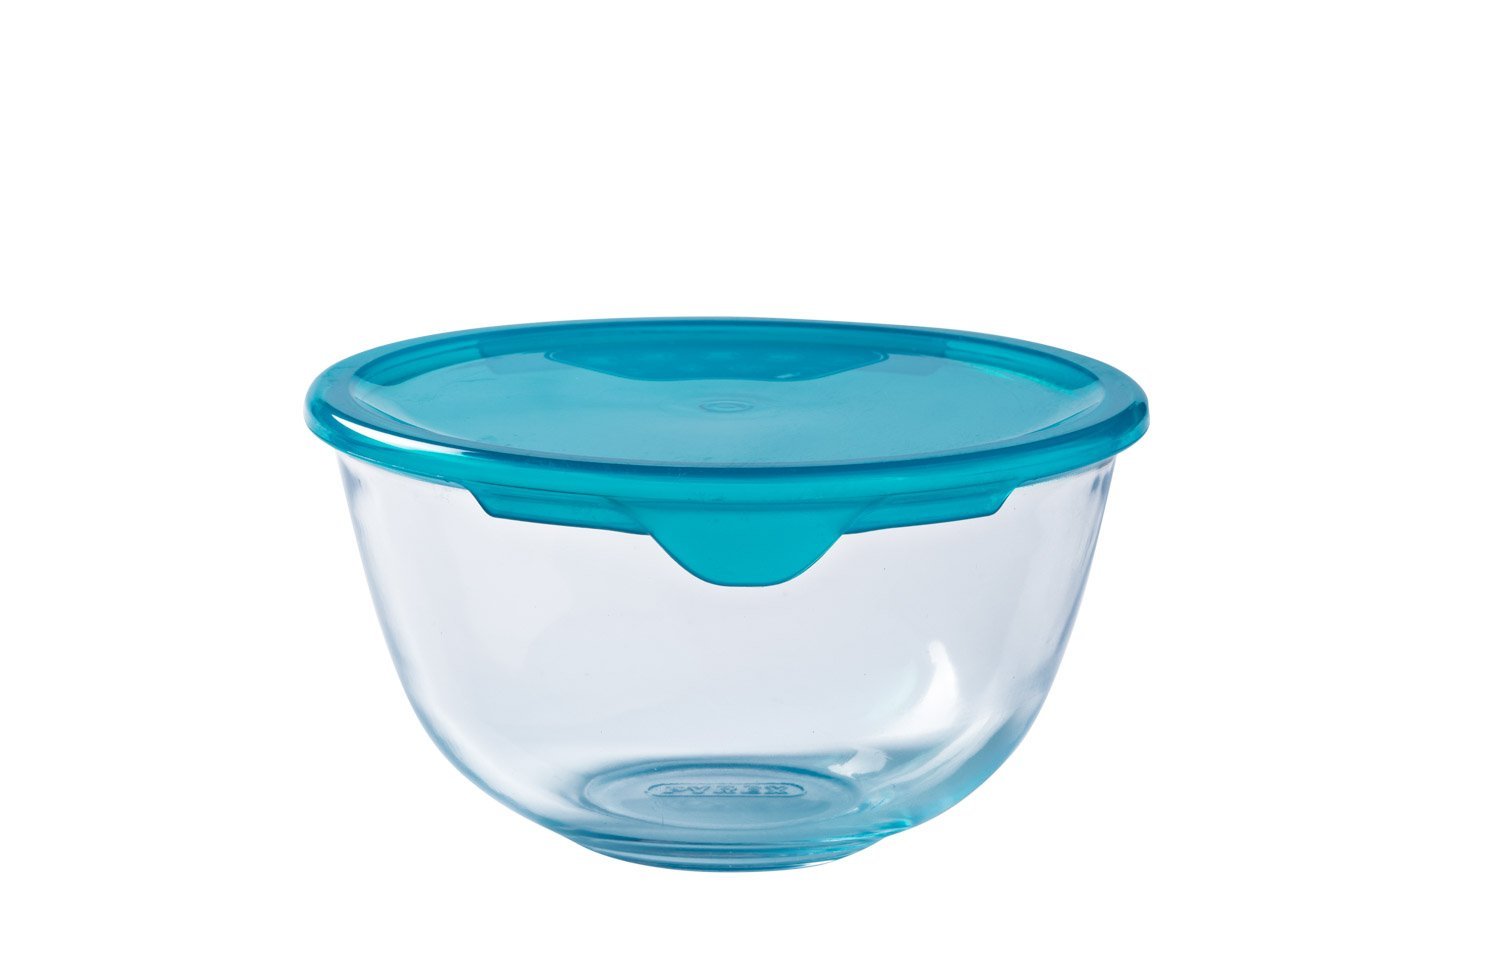 French PYREX Mixing Bowls - made of Borosilicate Glass Cookware